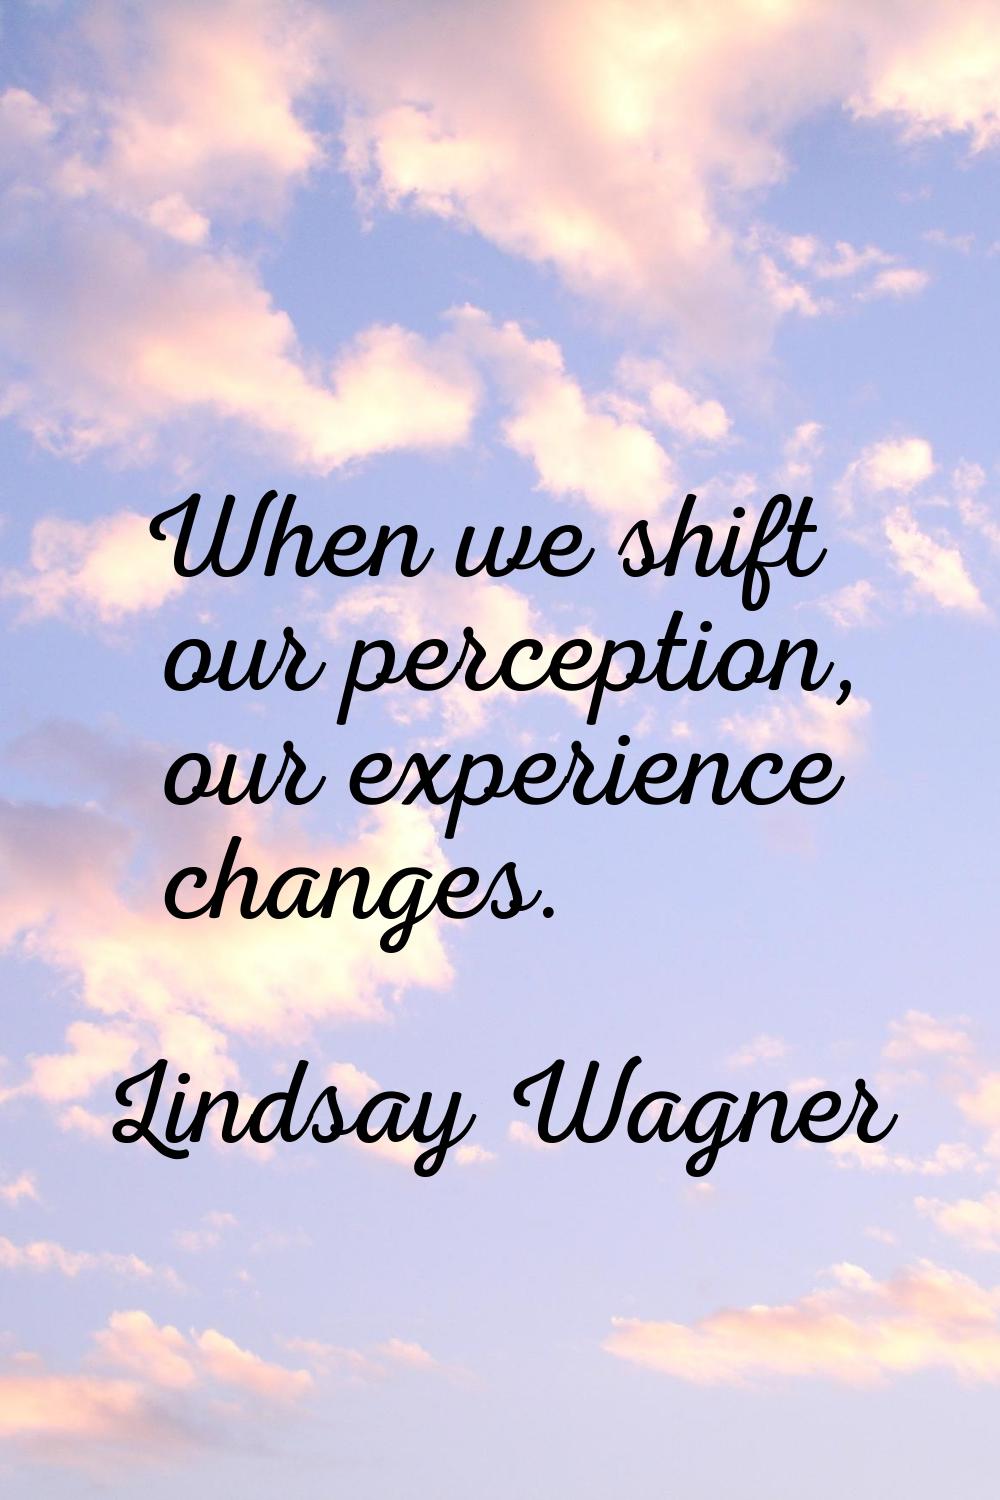 When we shift our perception, our experience changes.